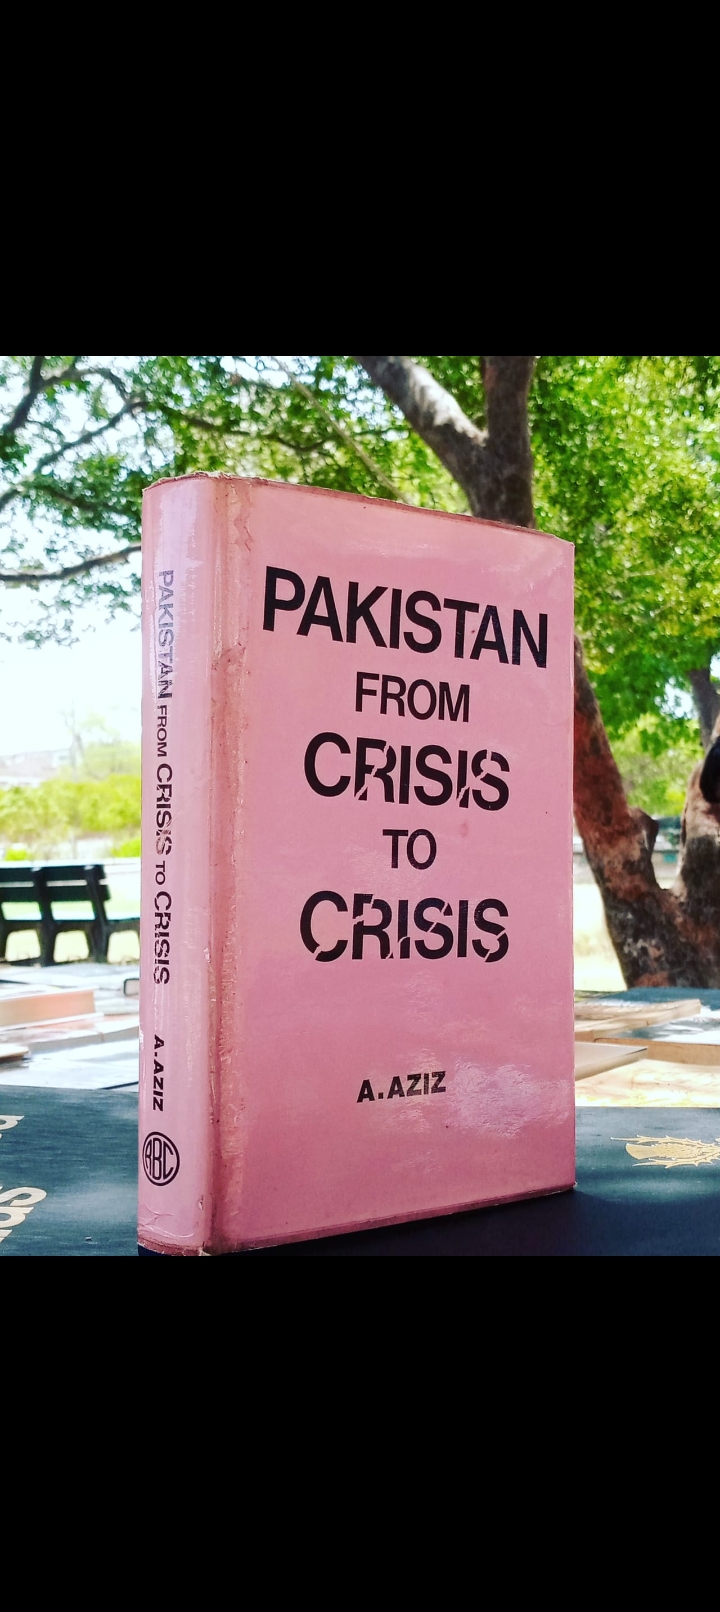 pakistan from crisis to crisis by a.aziz. original hardcover